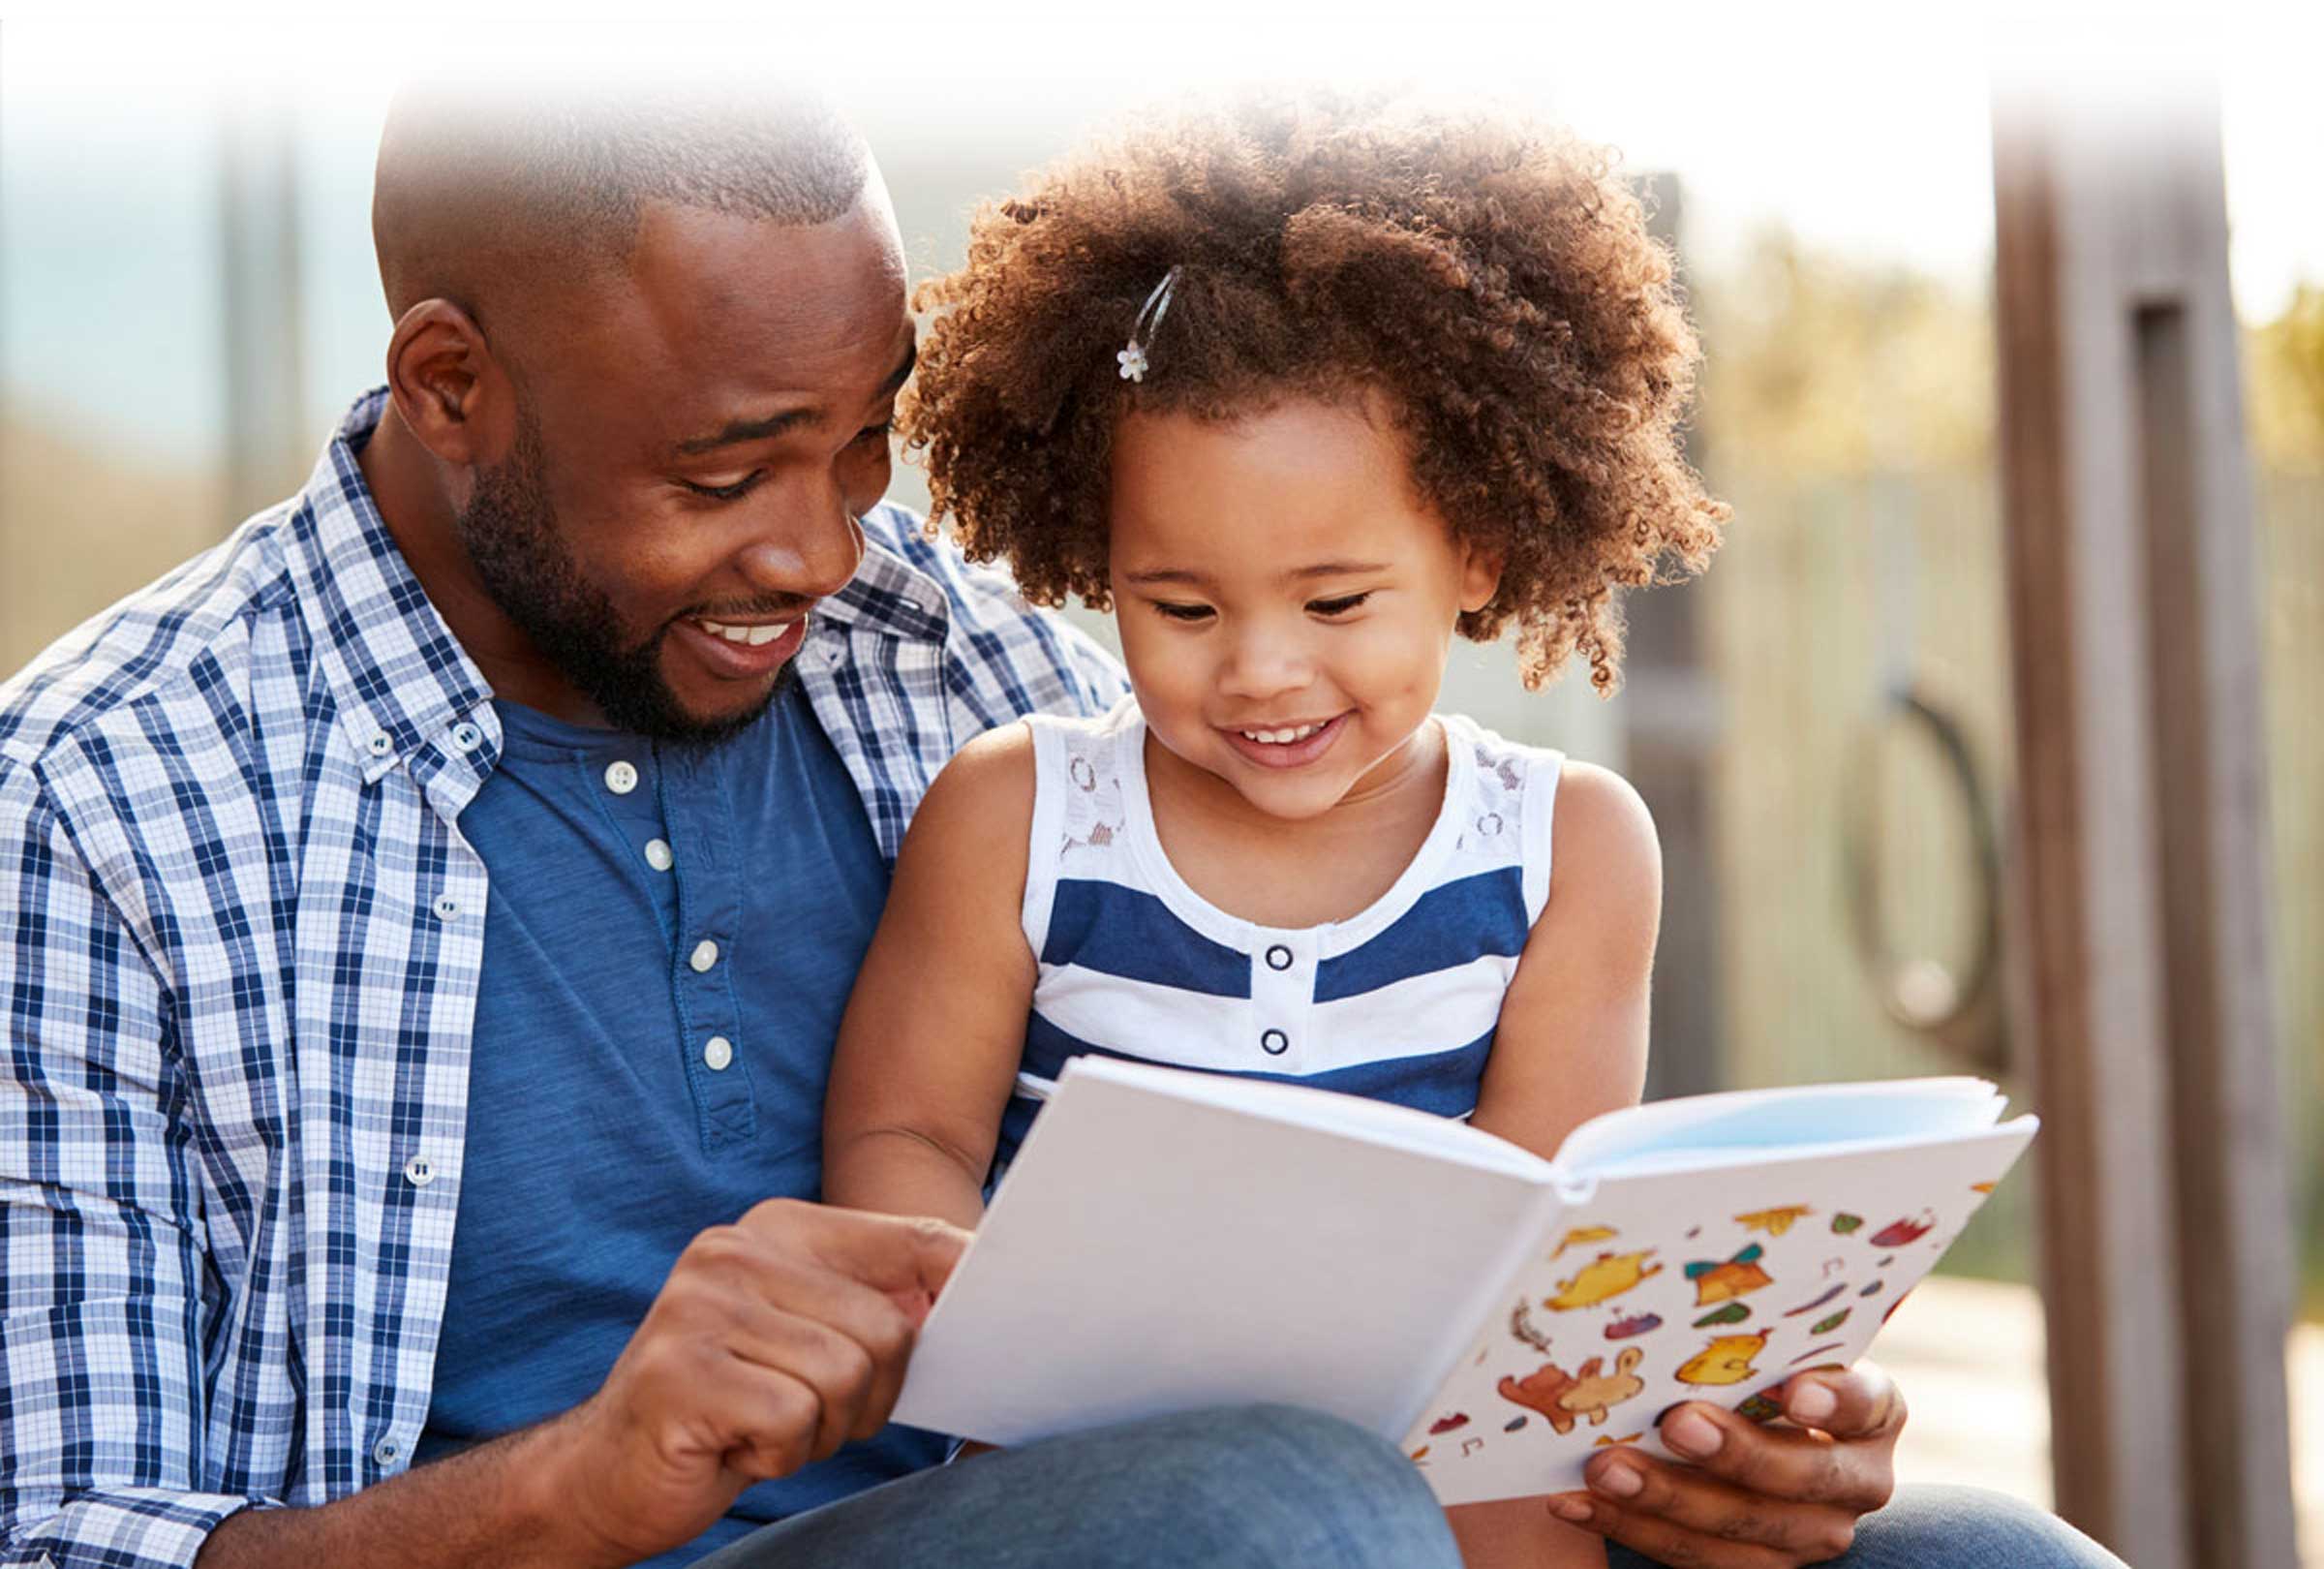 Dad with daughter reading book, smiling, outdoors